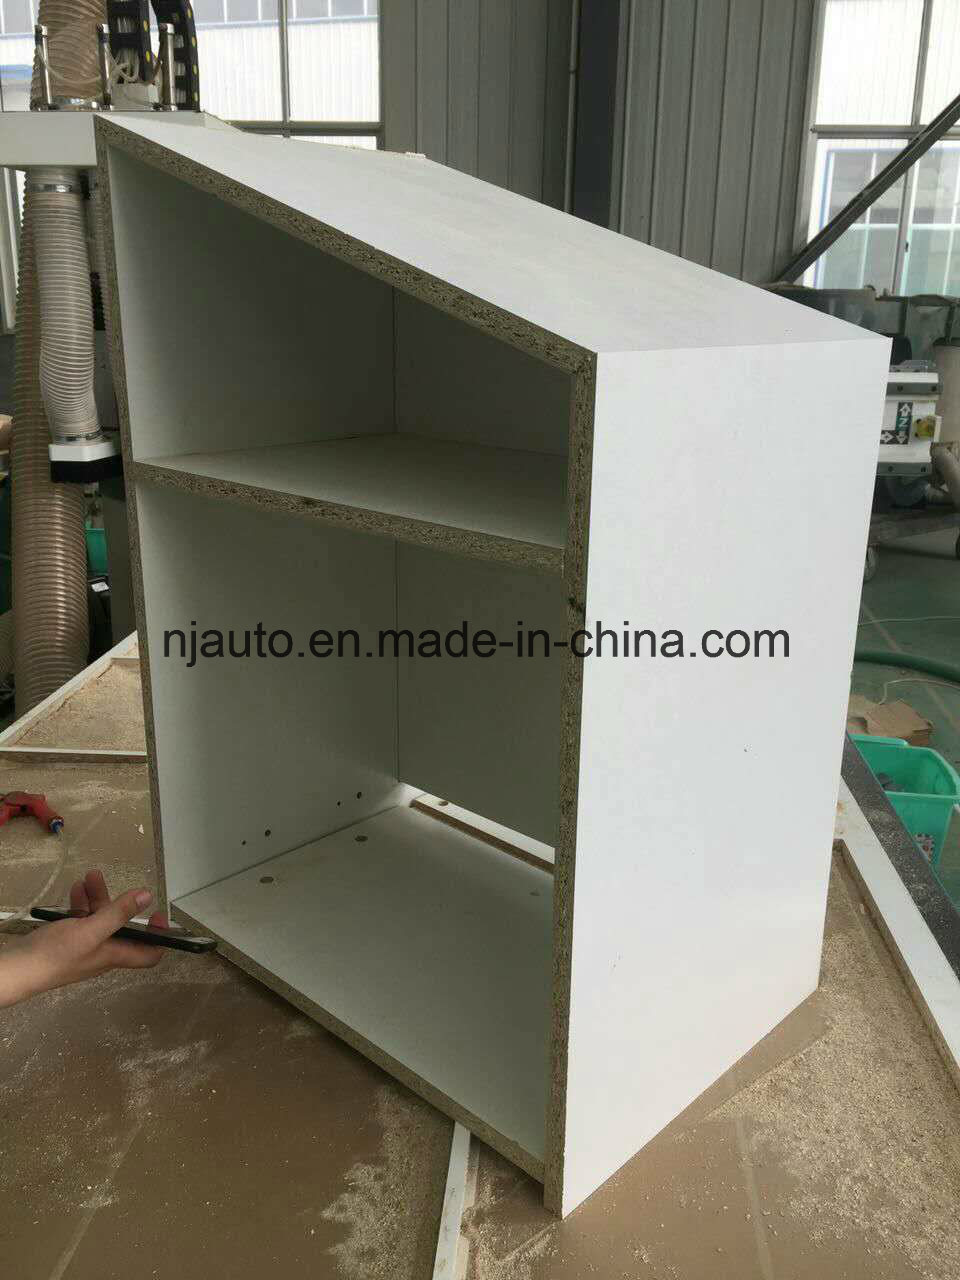 Intelligent Cutting and Drilling CNC Router with for Wood Caninet/Furniture